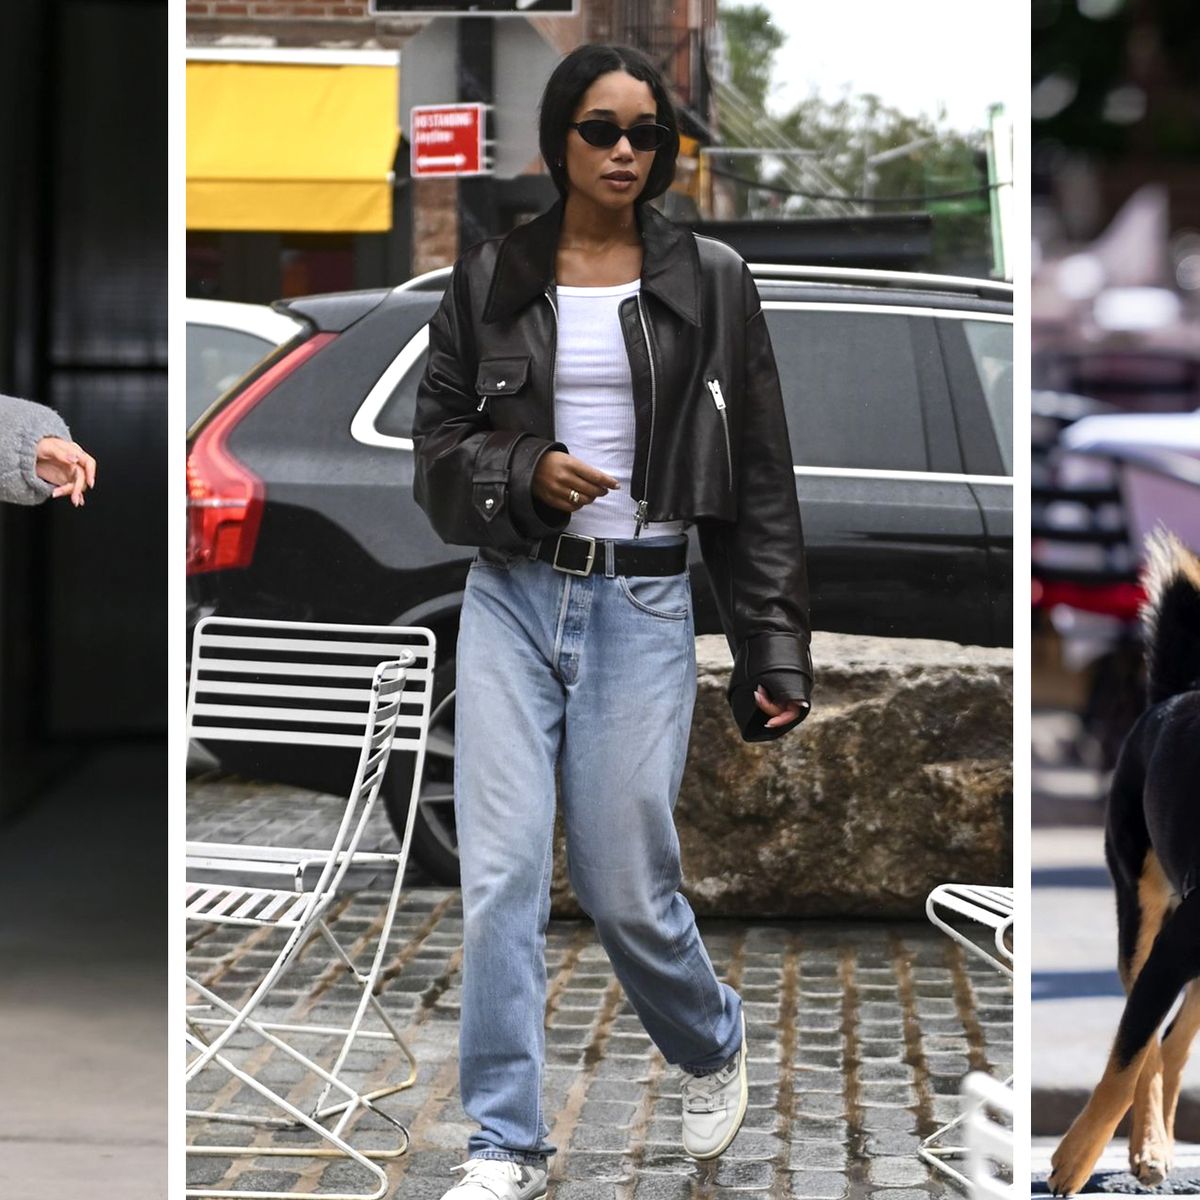 Style Watch: How celebrities wear the leather jacket for autumn style?